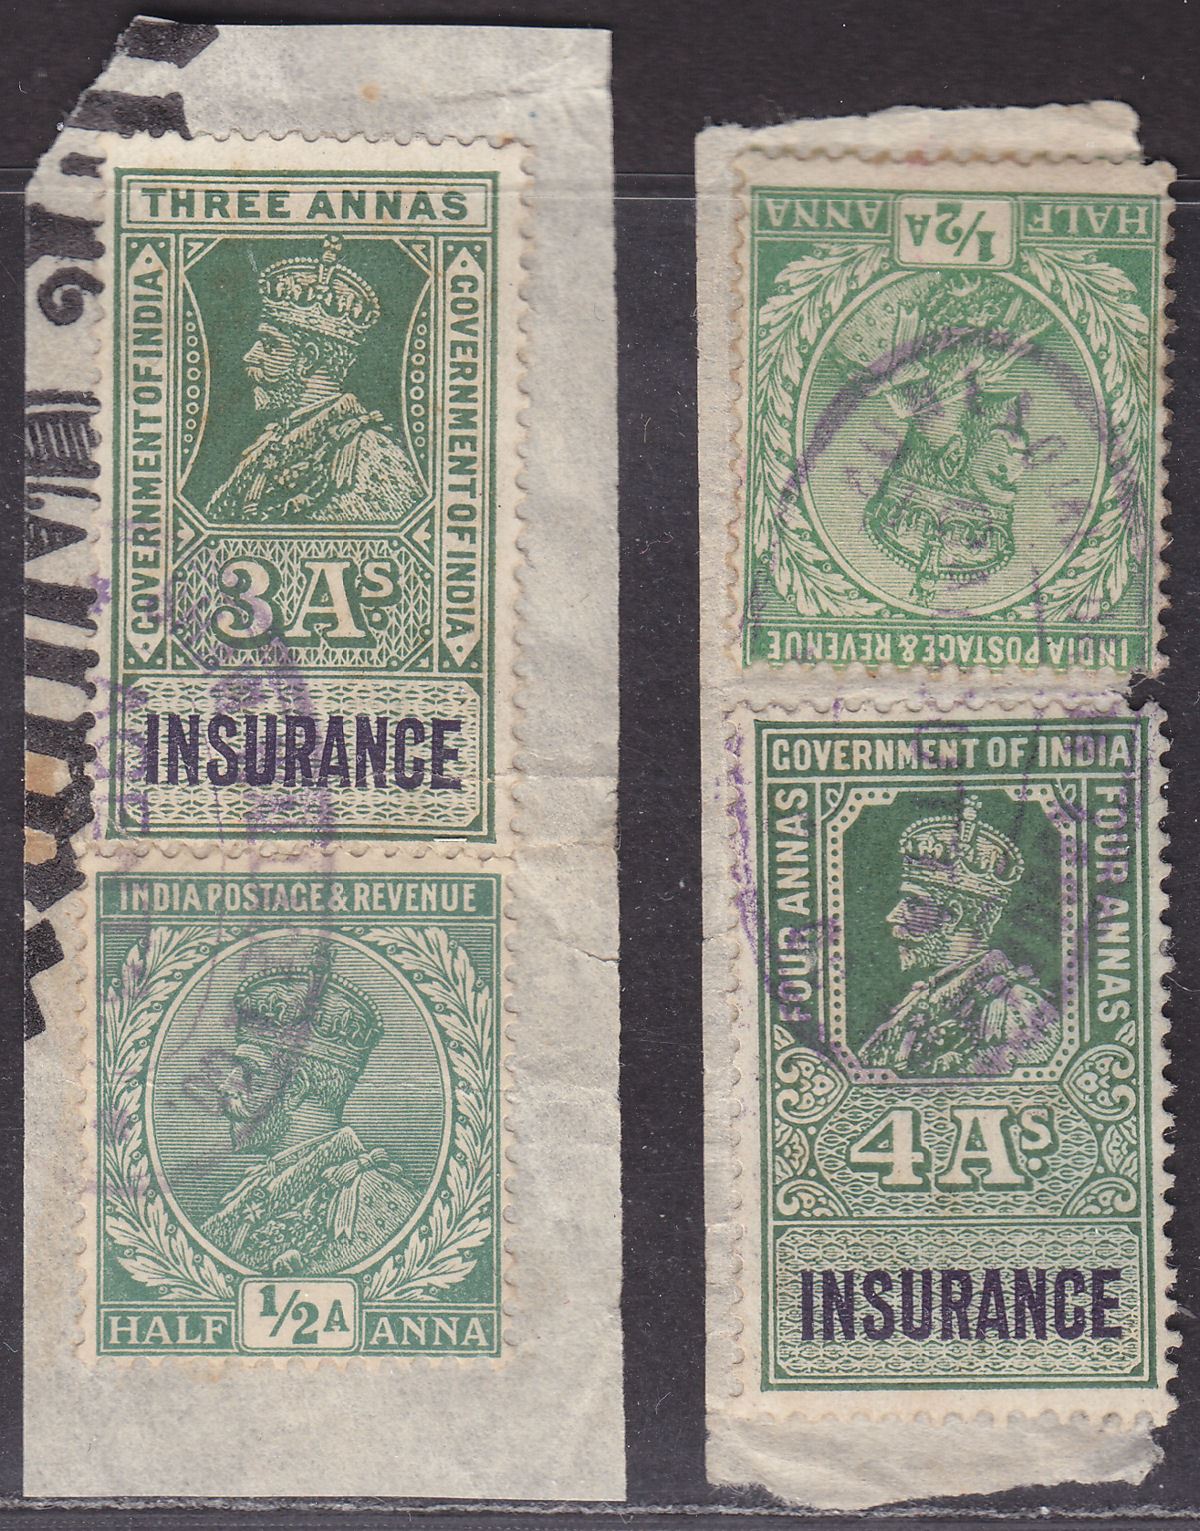 India 1923 KGV Revenue Insurance 3a, 4a with Postage ½a Used on Pieces